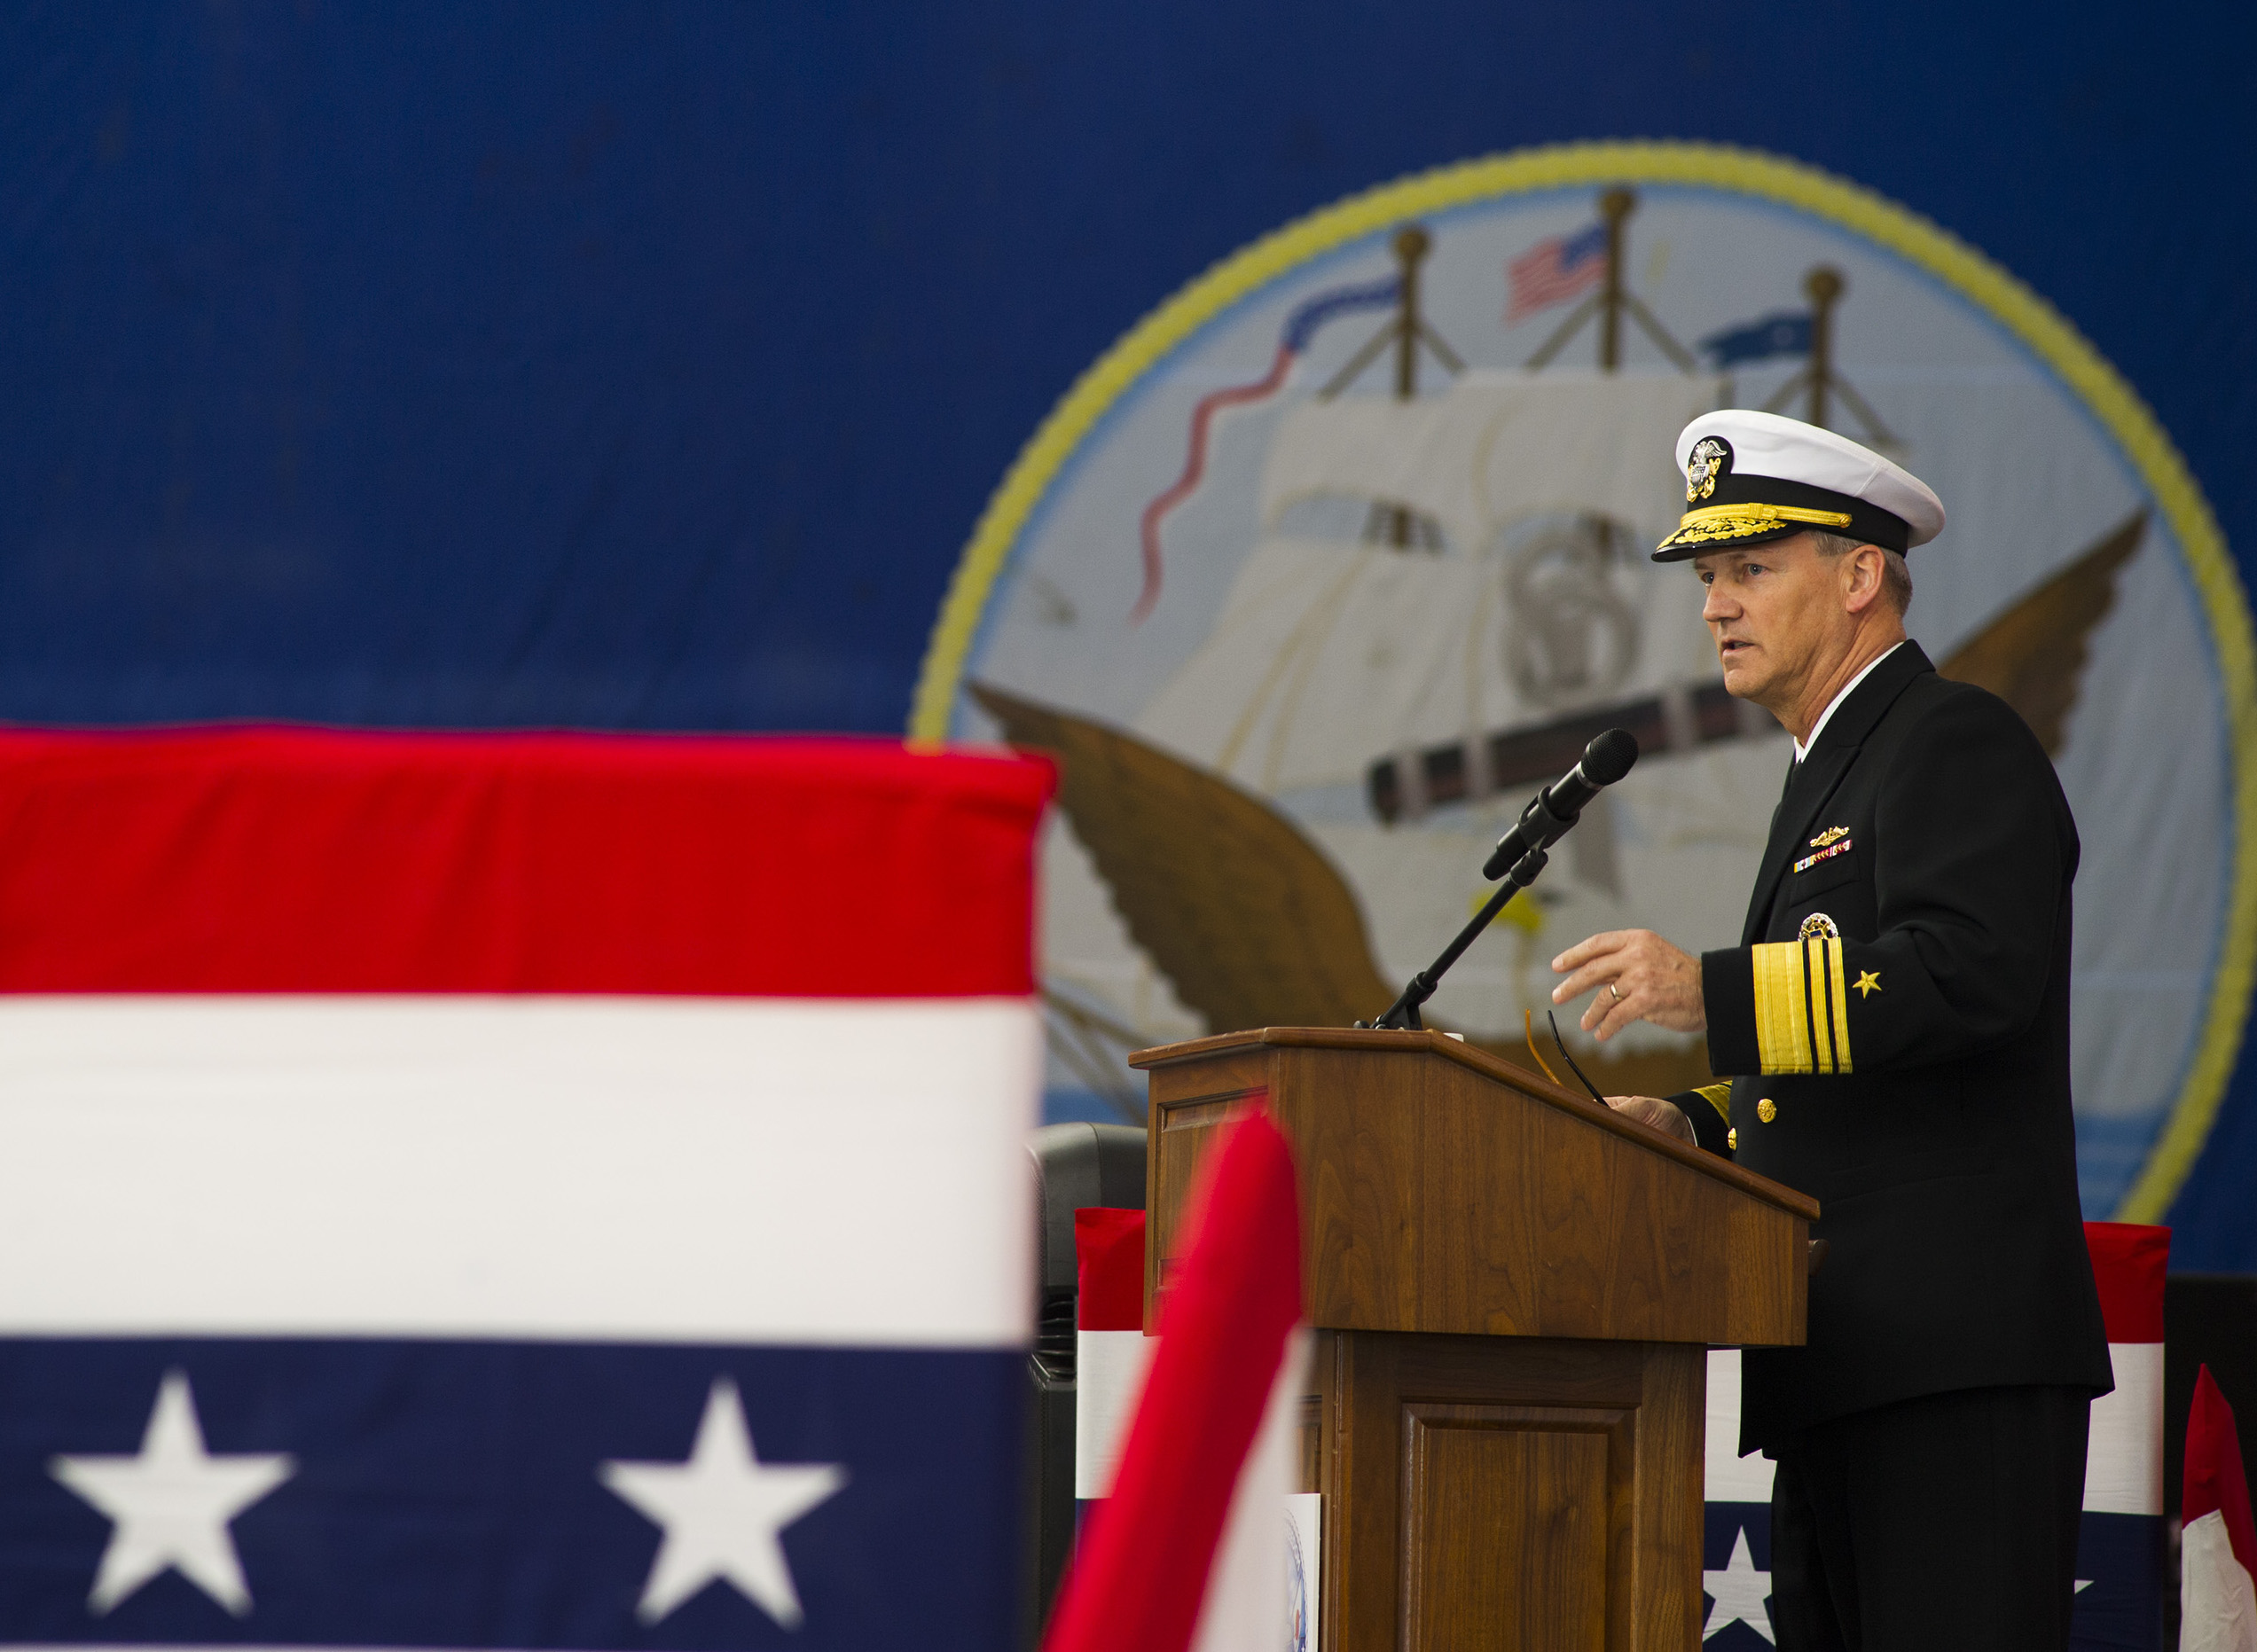 Vice Adm. Robert Thomas, commander of U.S. 7th Fleet, delivers remarks during a change of command ceremony aboard the Nimitz-class aircraft carrier USS George Washington (CVN-73). US Navy Photo